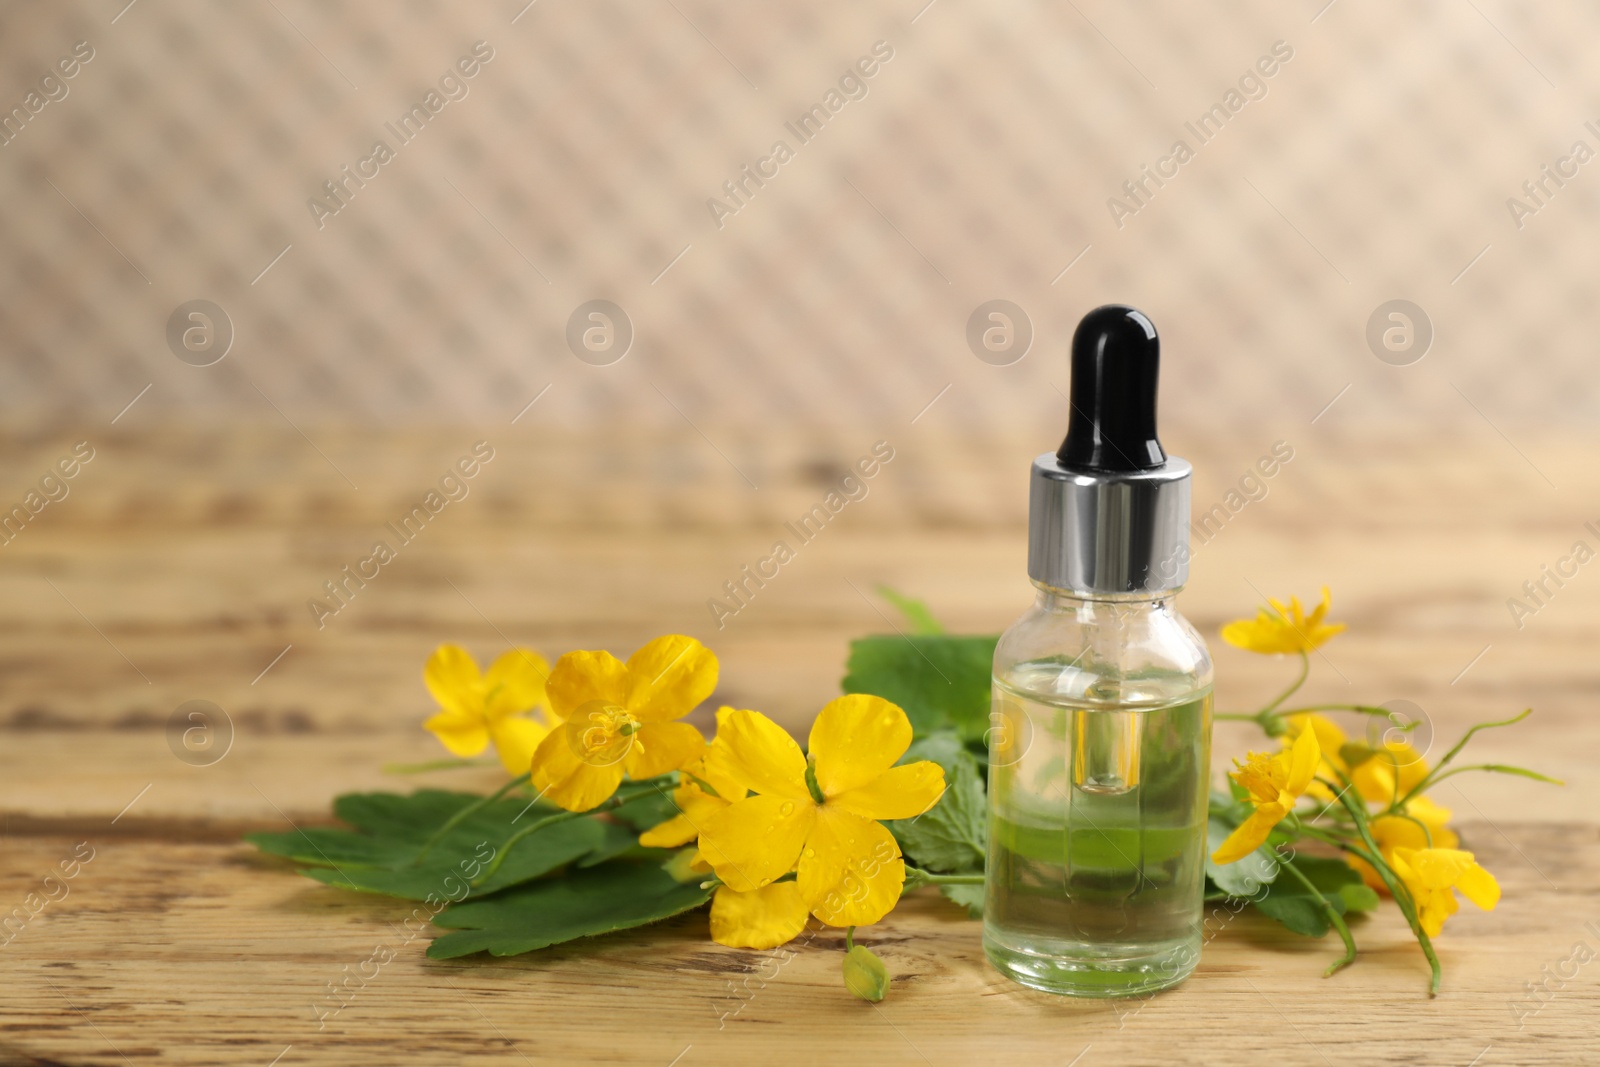 Photo of Bottle of natural celandine oil near flowers on wooden table, space for text